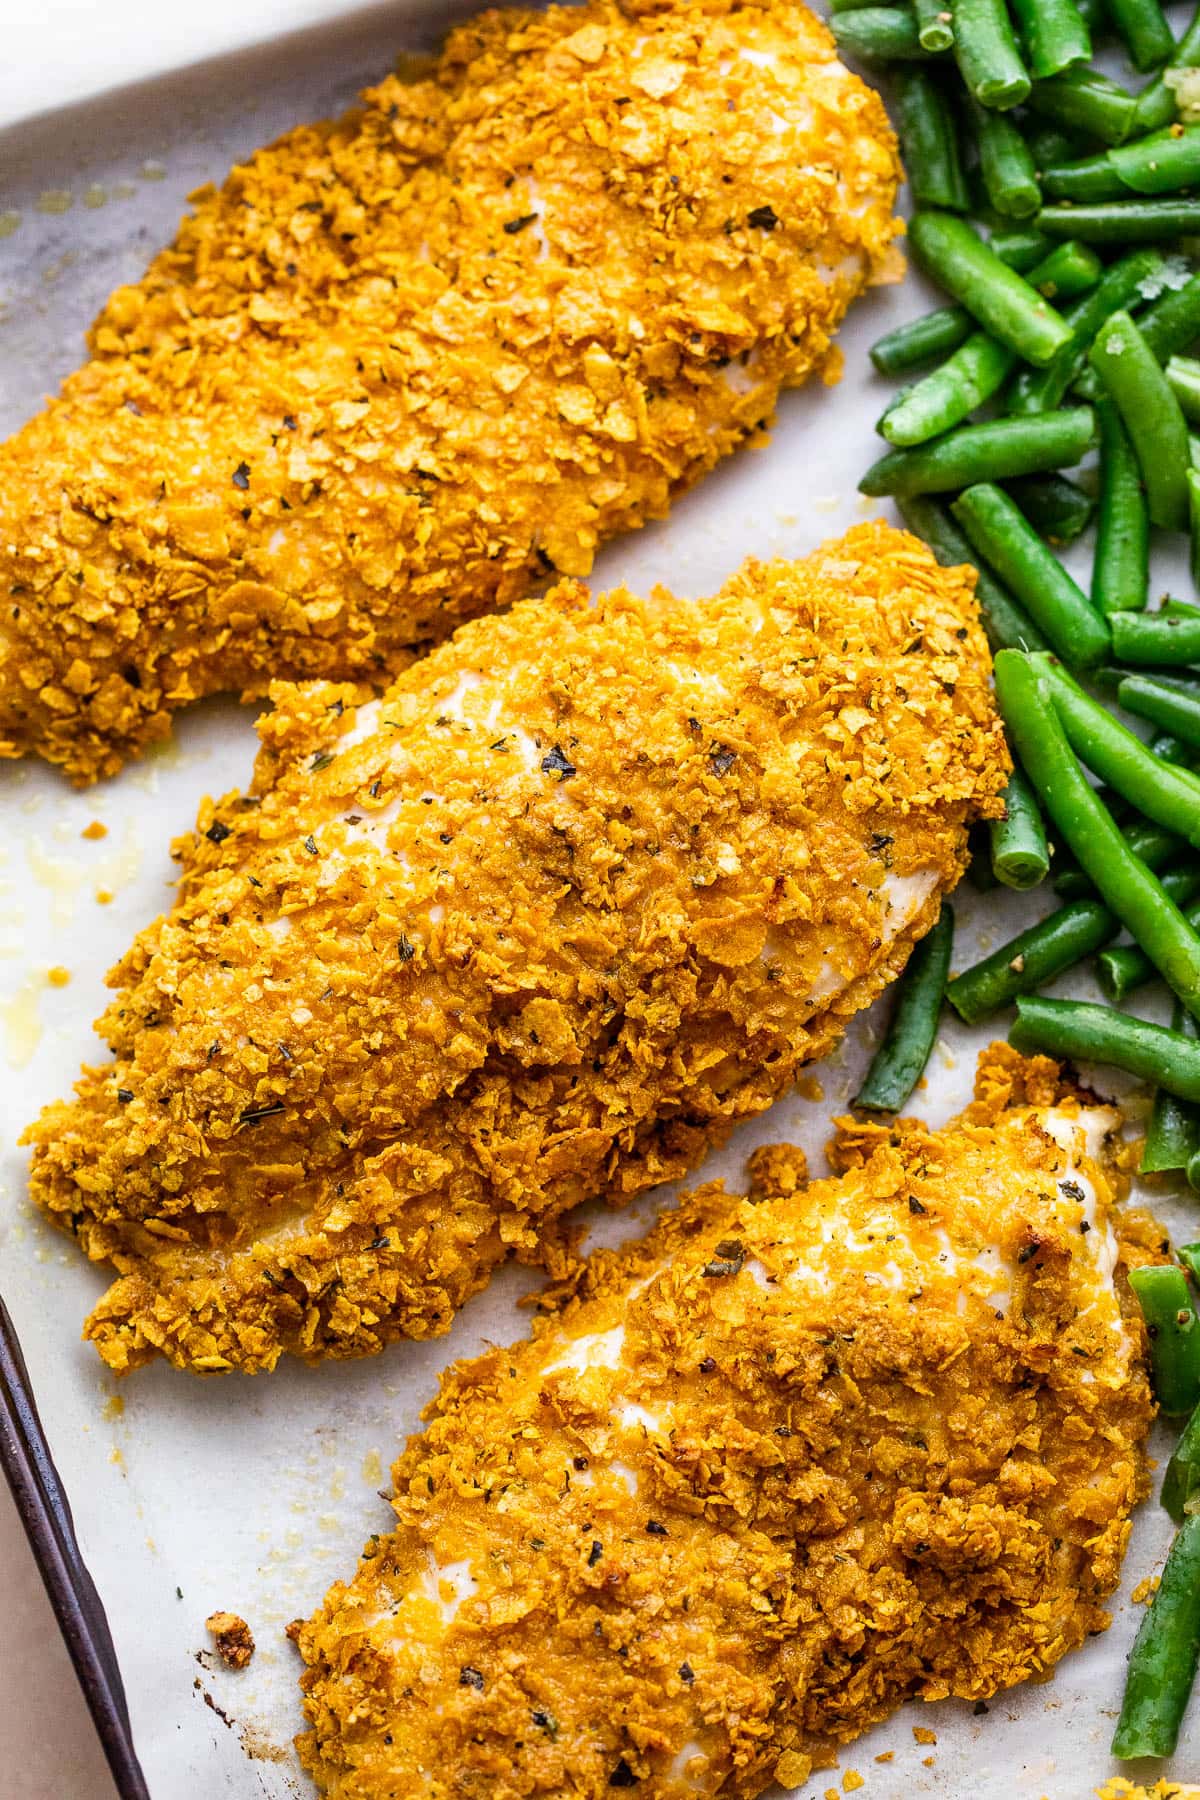 Baking sheet with three breaded chicken breasts and green beans arranged on the side of the chicken.